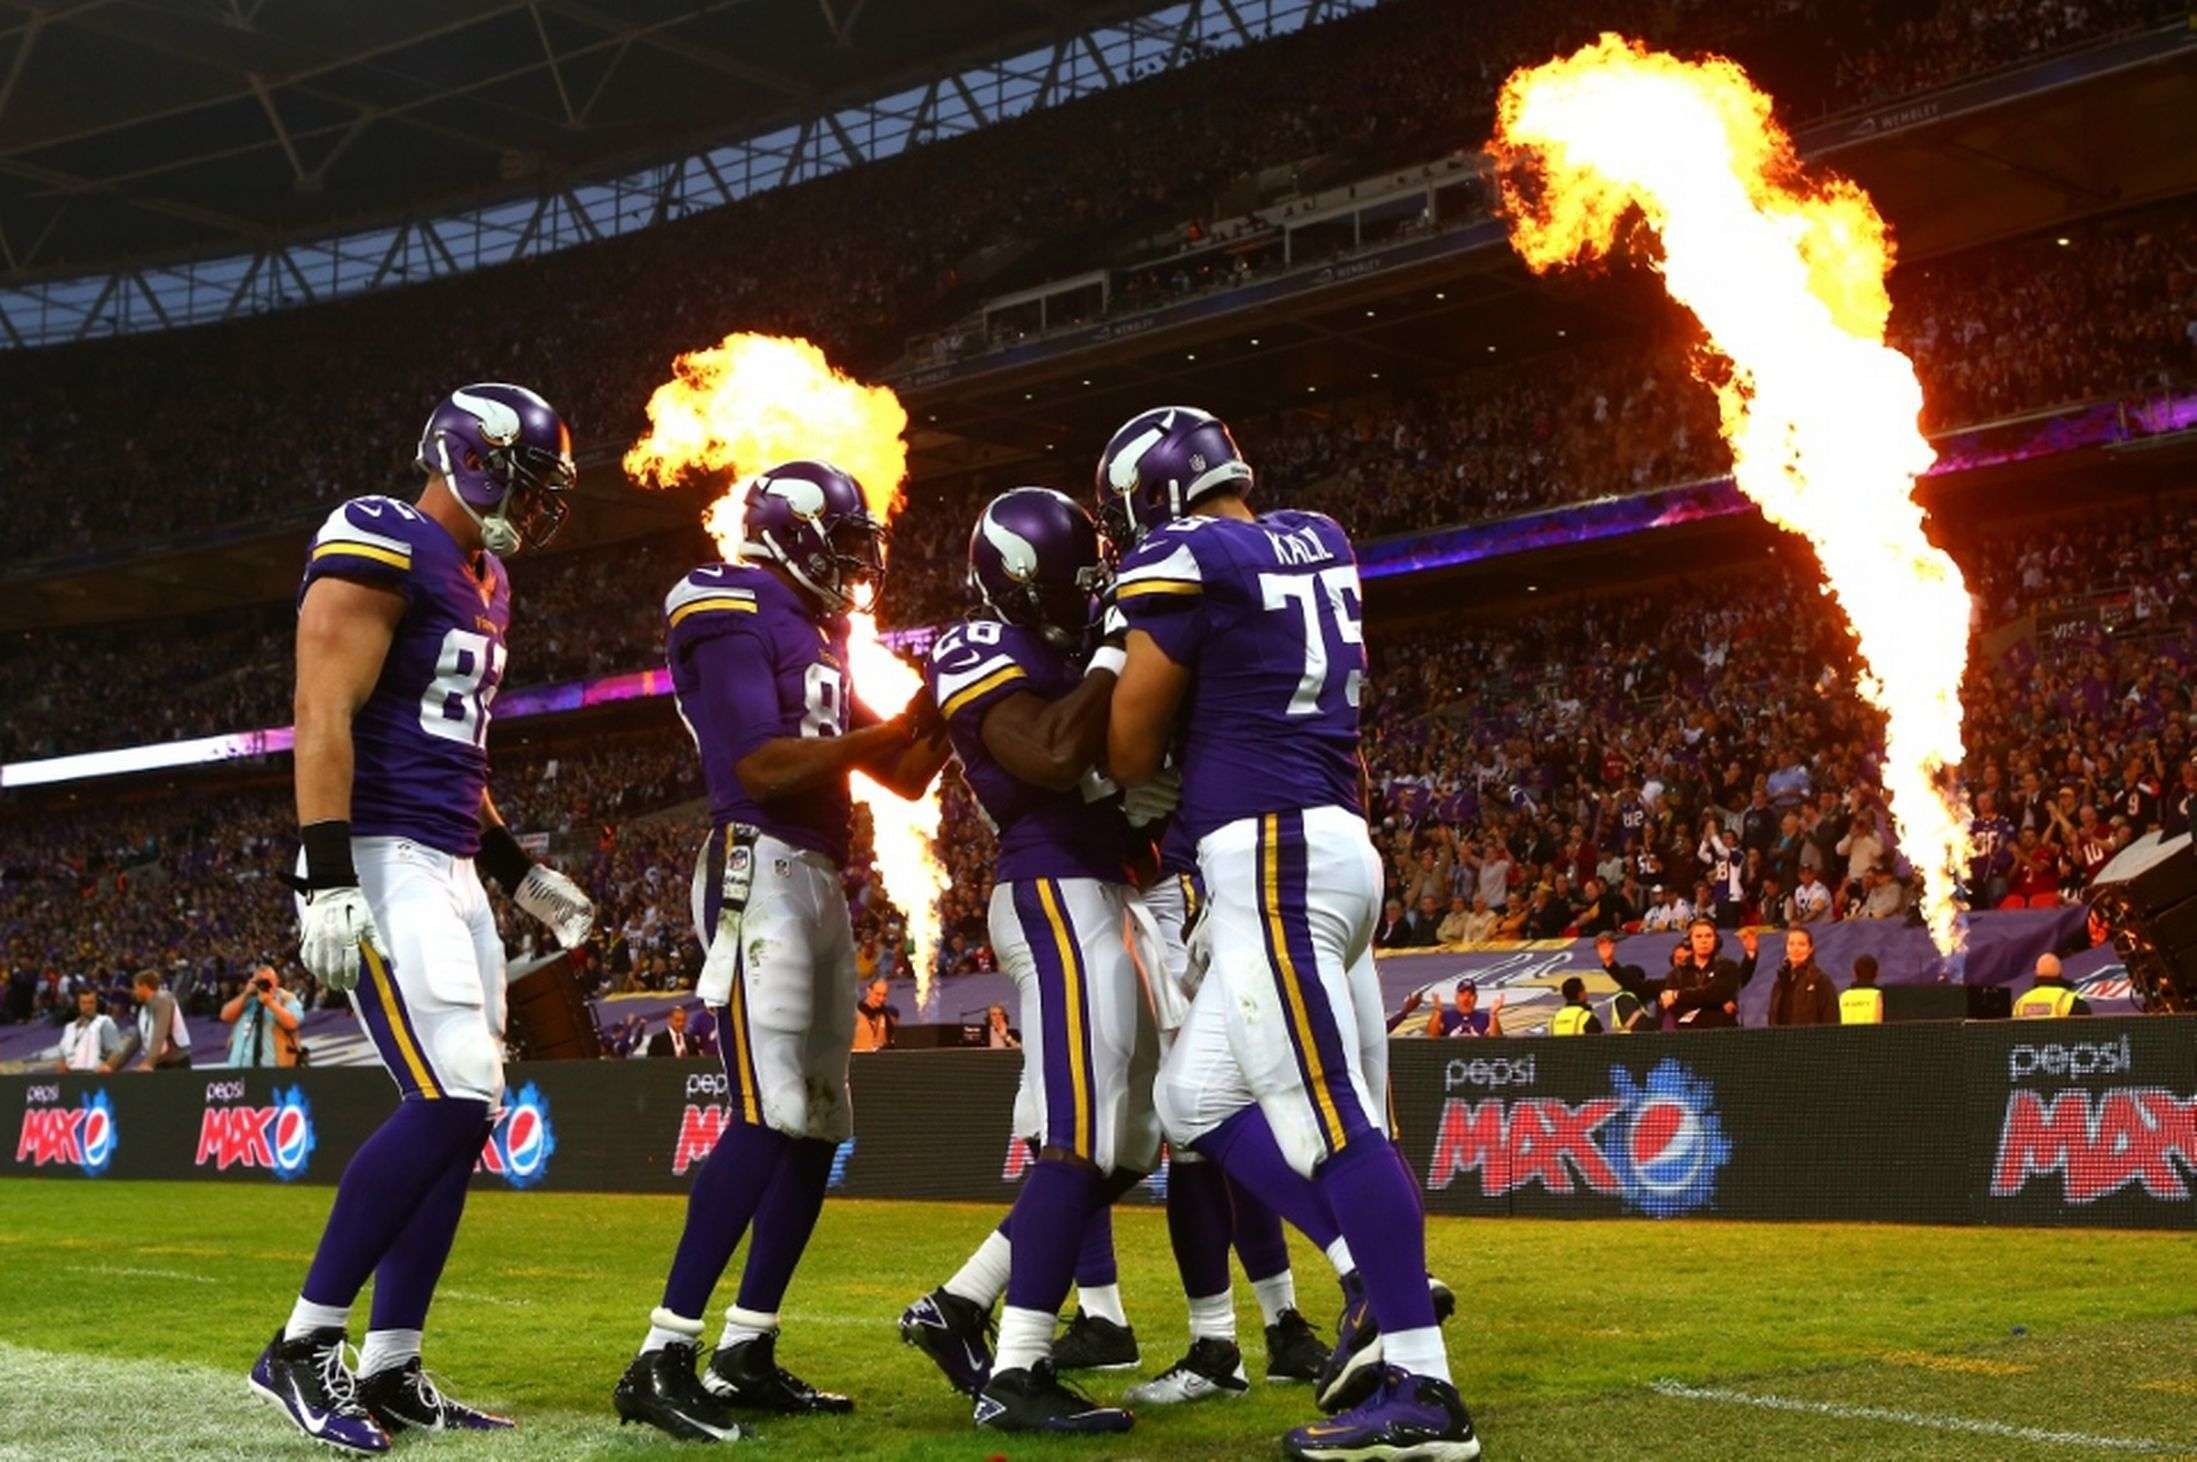 2197x1462 ... Minnesota Vikings Backgrounds Download For Desktop, Laptop and Mobiles.  Here You Can Download More than 5 Million Photography collections Uploaded  By ...